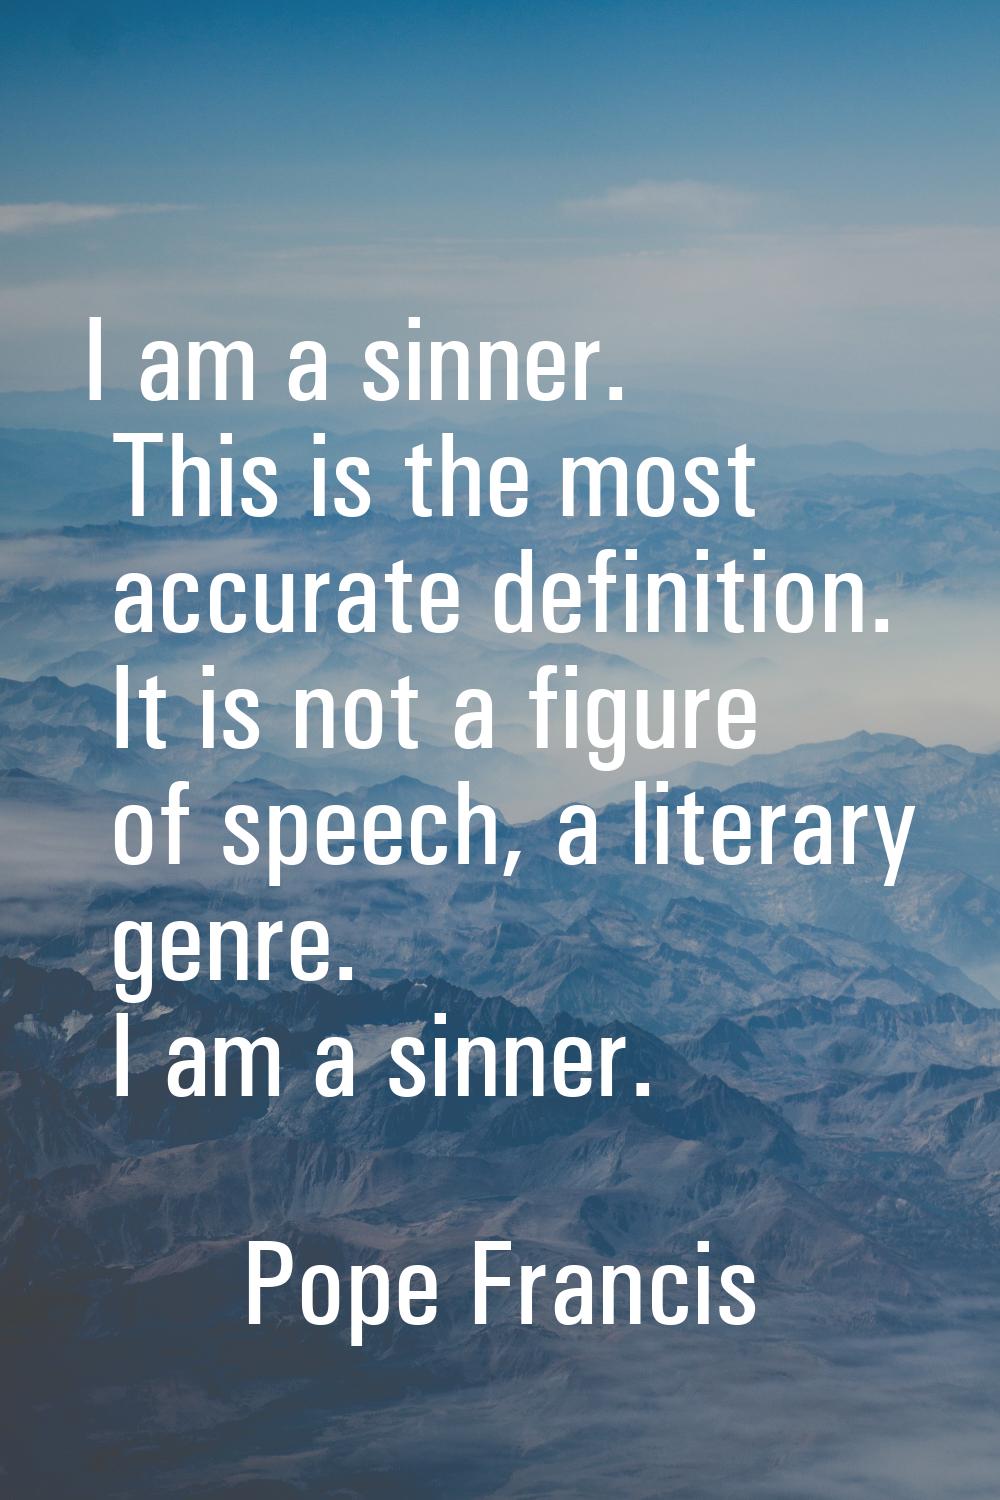 I am a sinner. This is the most accurate definition. It is not a figure of speech, a literary genre